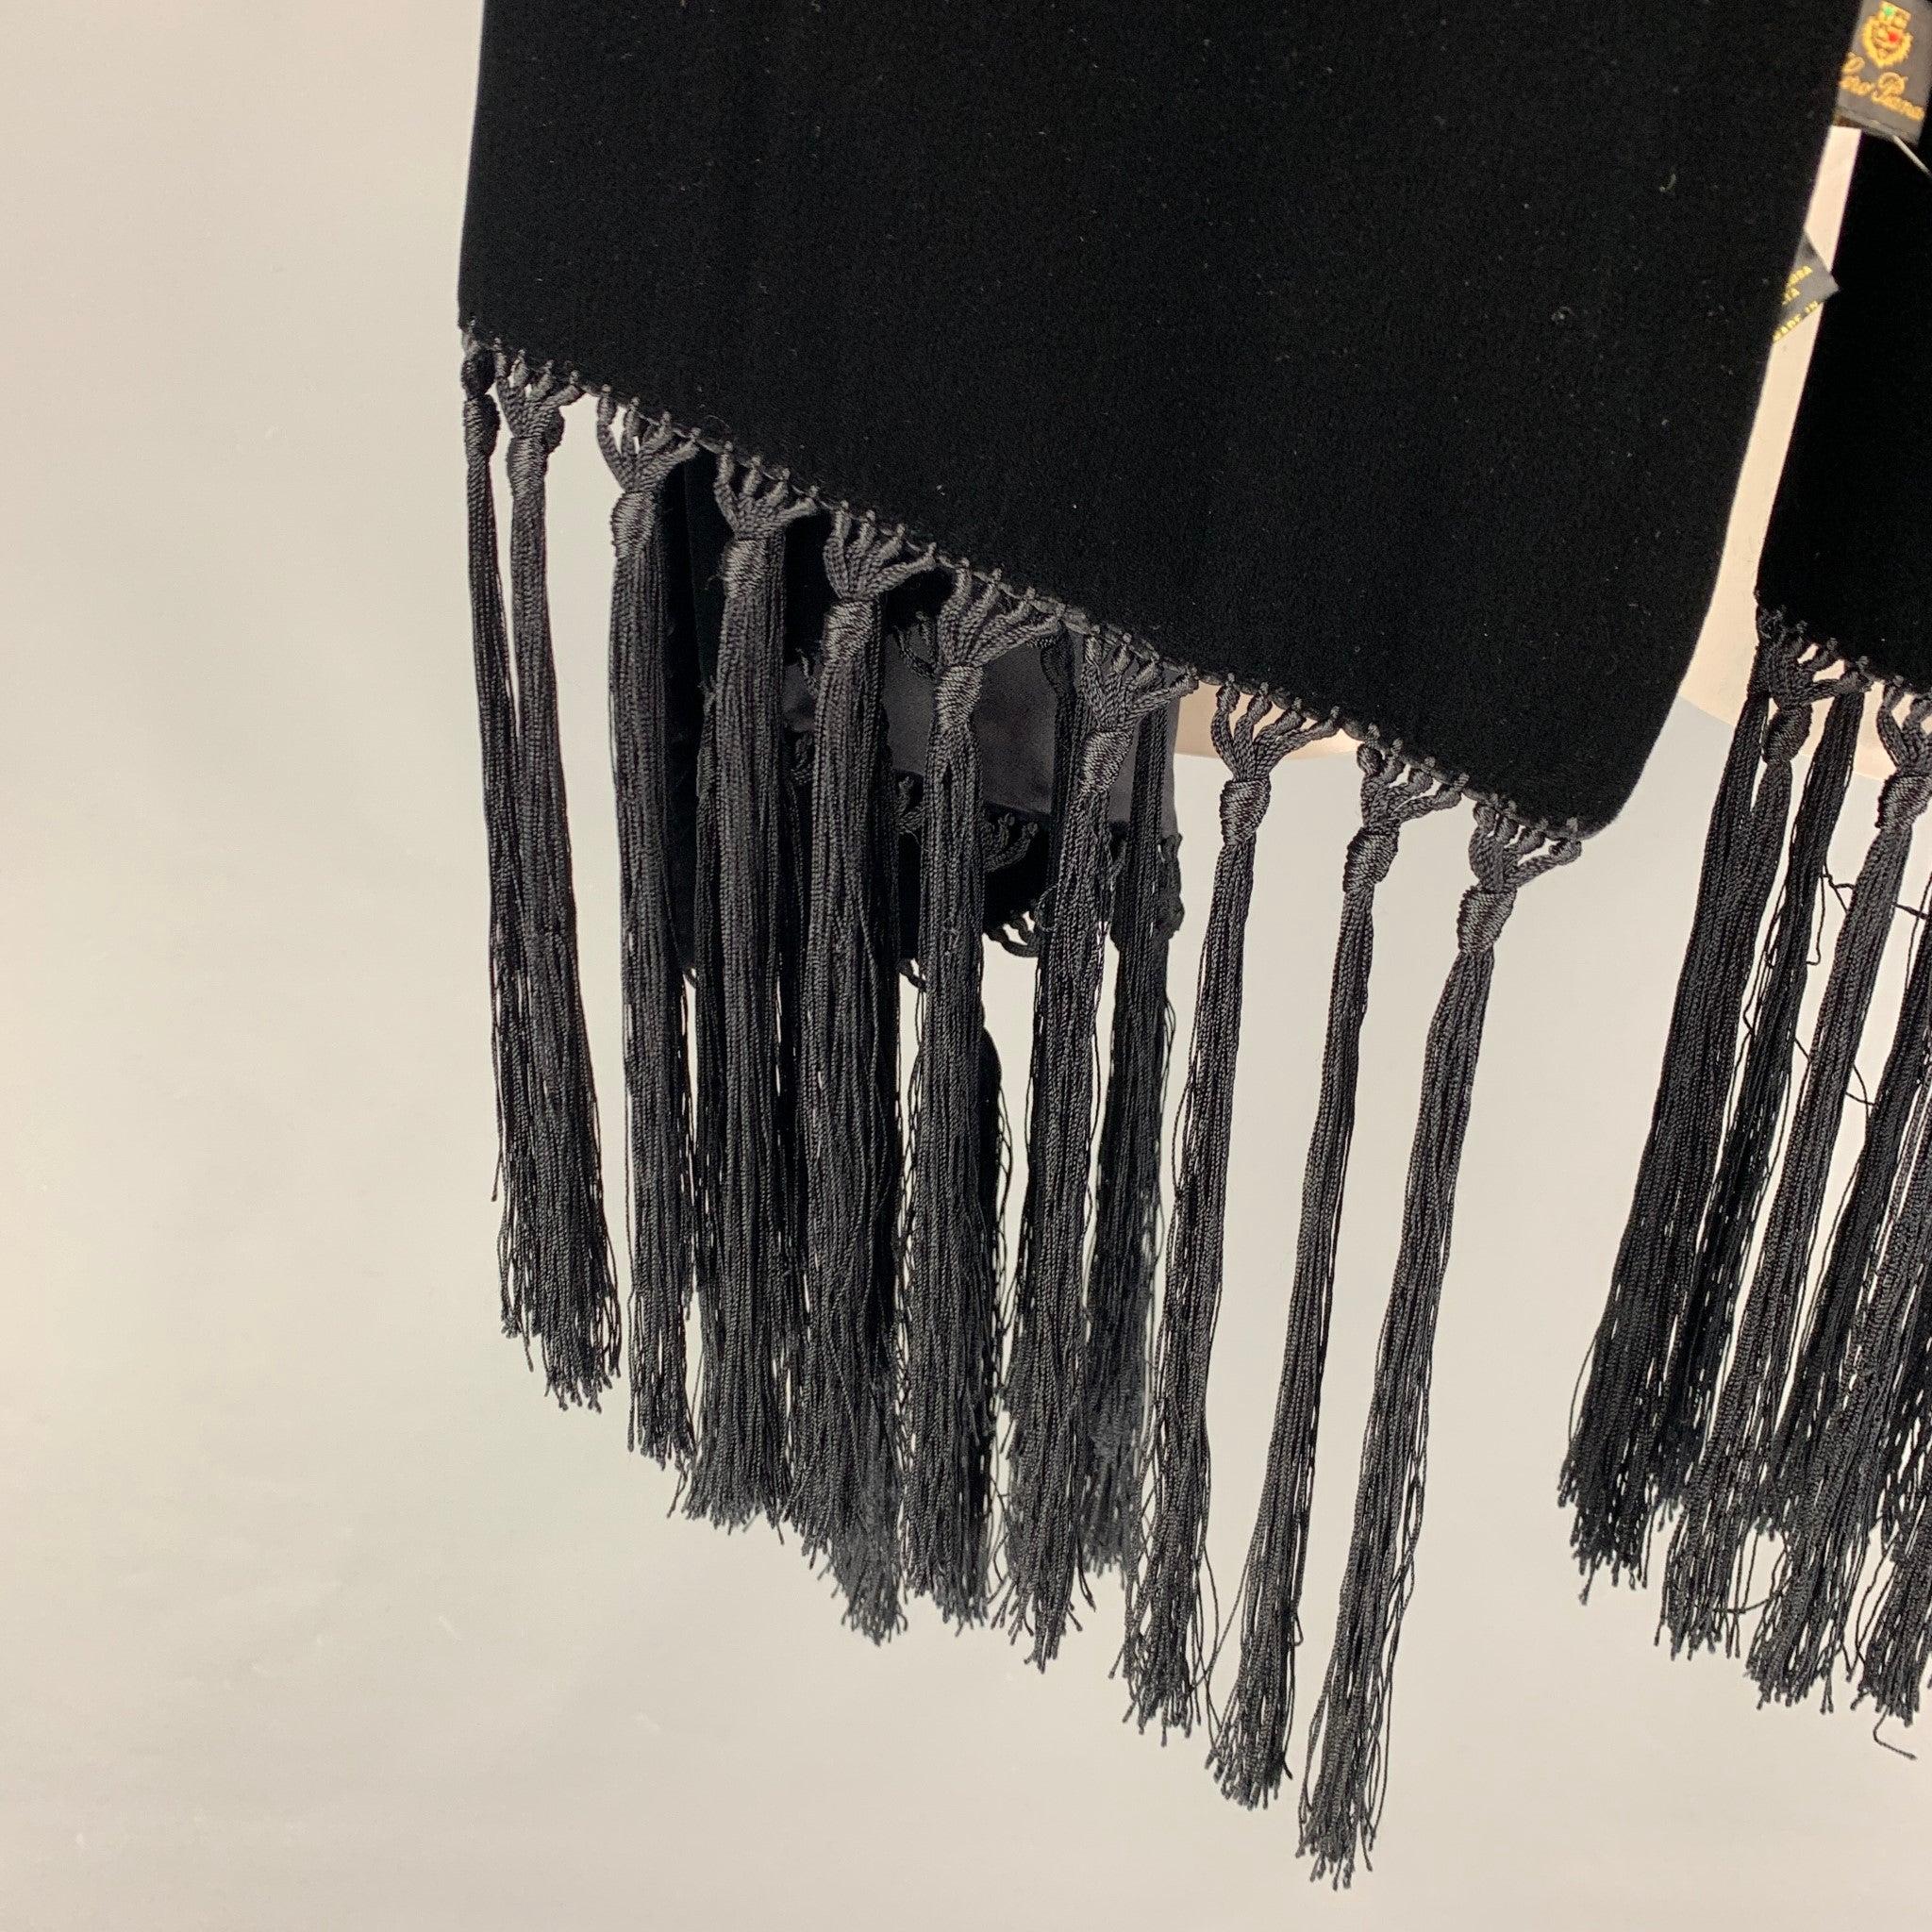 LORO PIANA scarf comes in a black velvet viscose / silk featuring a fringe trim. Made in Italy.
Very Good
Pre-Owned Condition. 

Measurements: 
  72 inches  x 33.5 inches 
  
  
 
Reference: 119780
Category: Scarves
More Details
    
Brand:  LORO